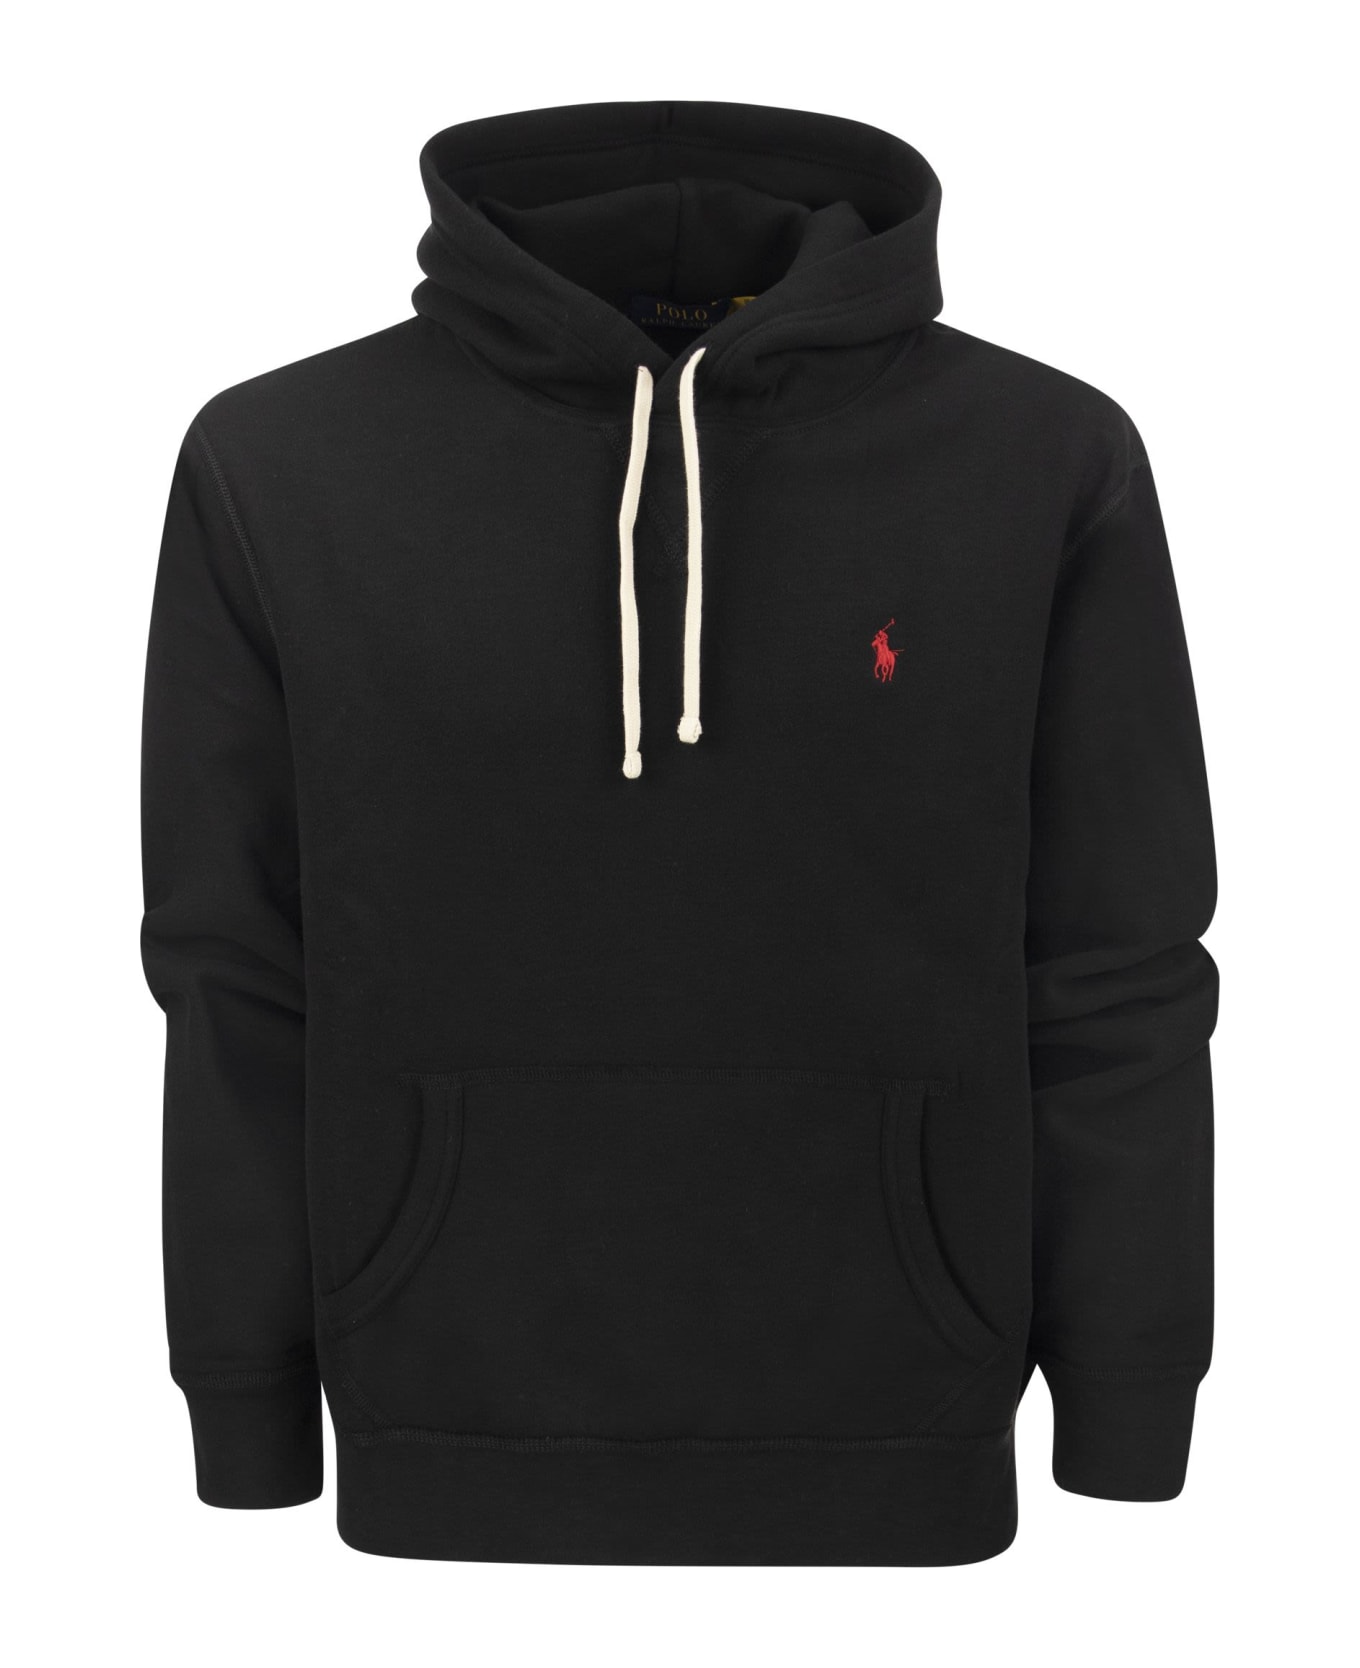 Polo Ralph Lauren Black Hoodie With Contrasting Logo Embroidery In Cotton Man - Black